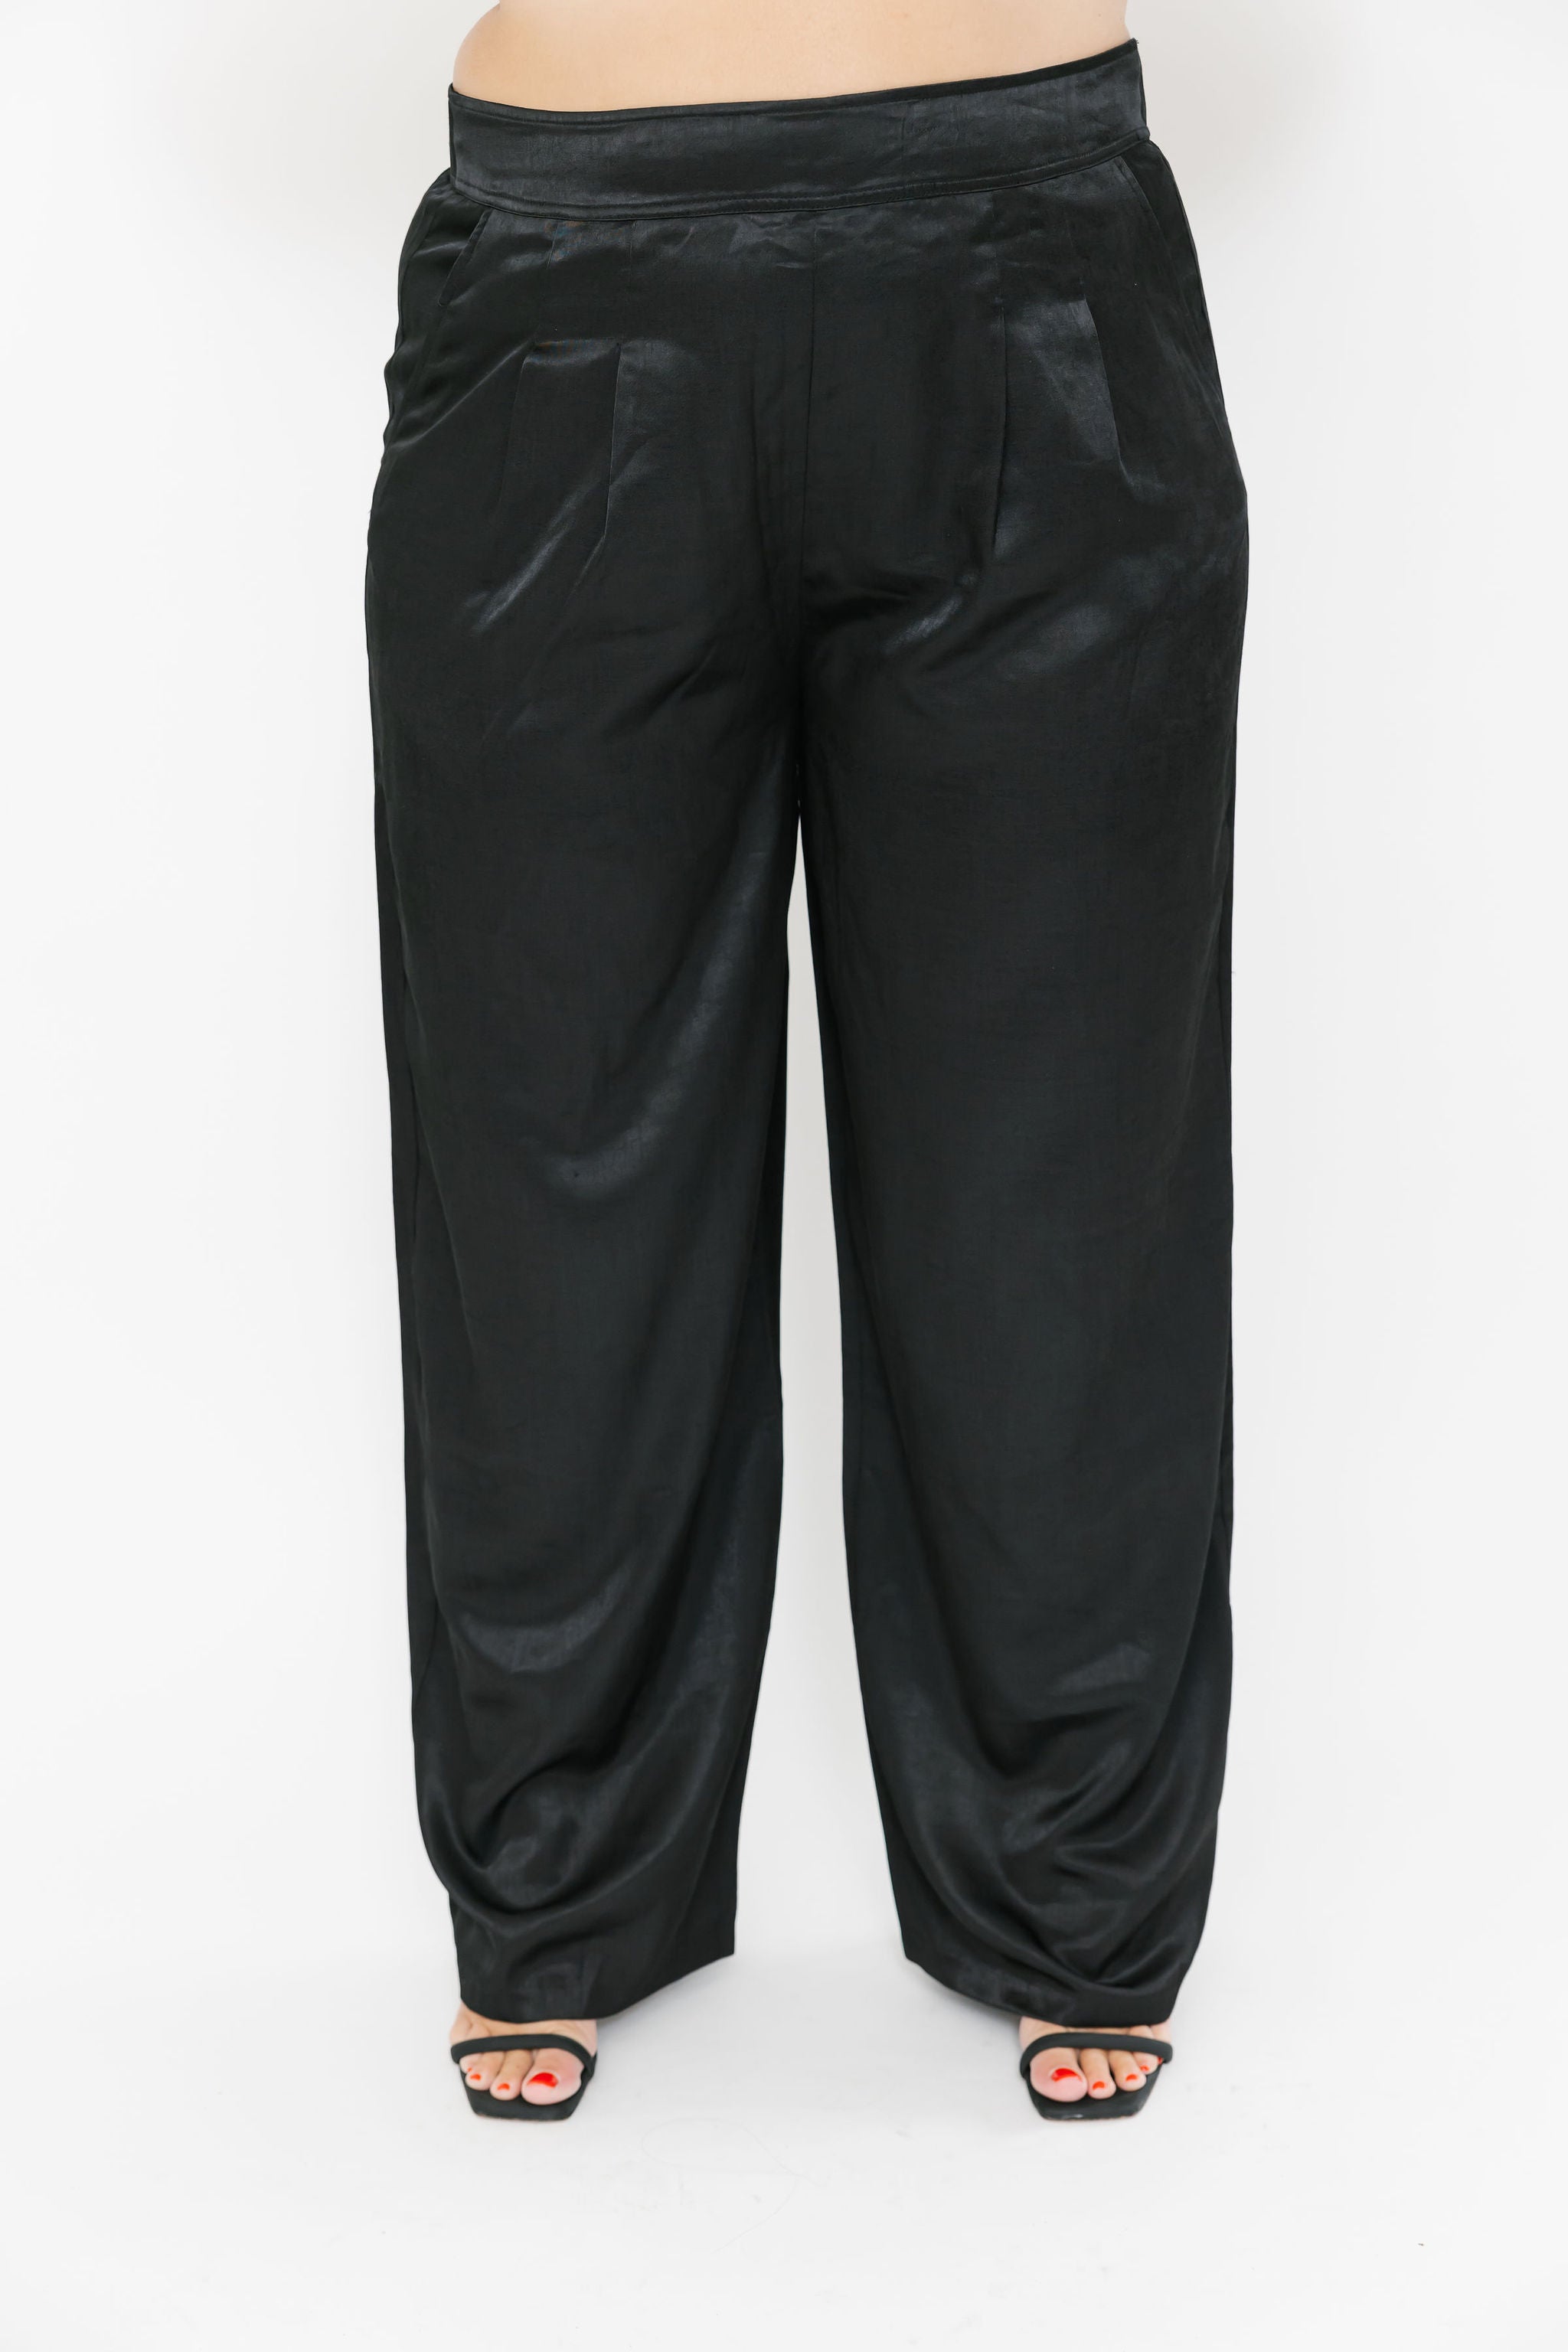 Holden Wide Leg Pant in Midnight Black